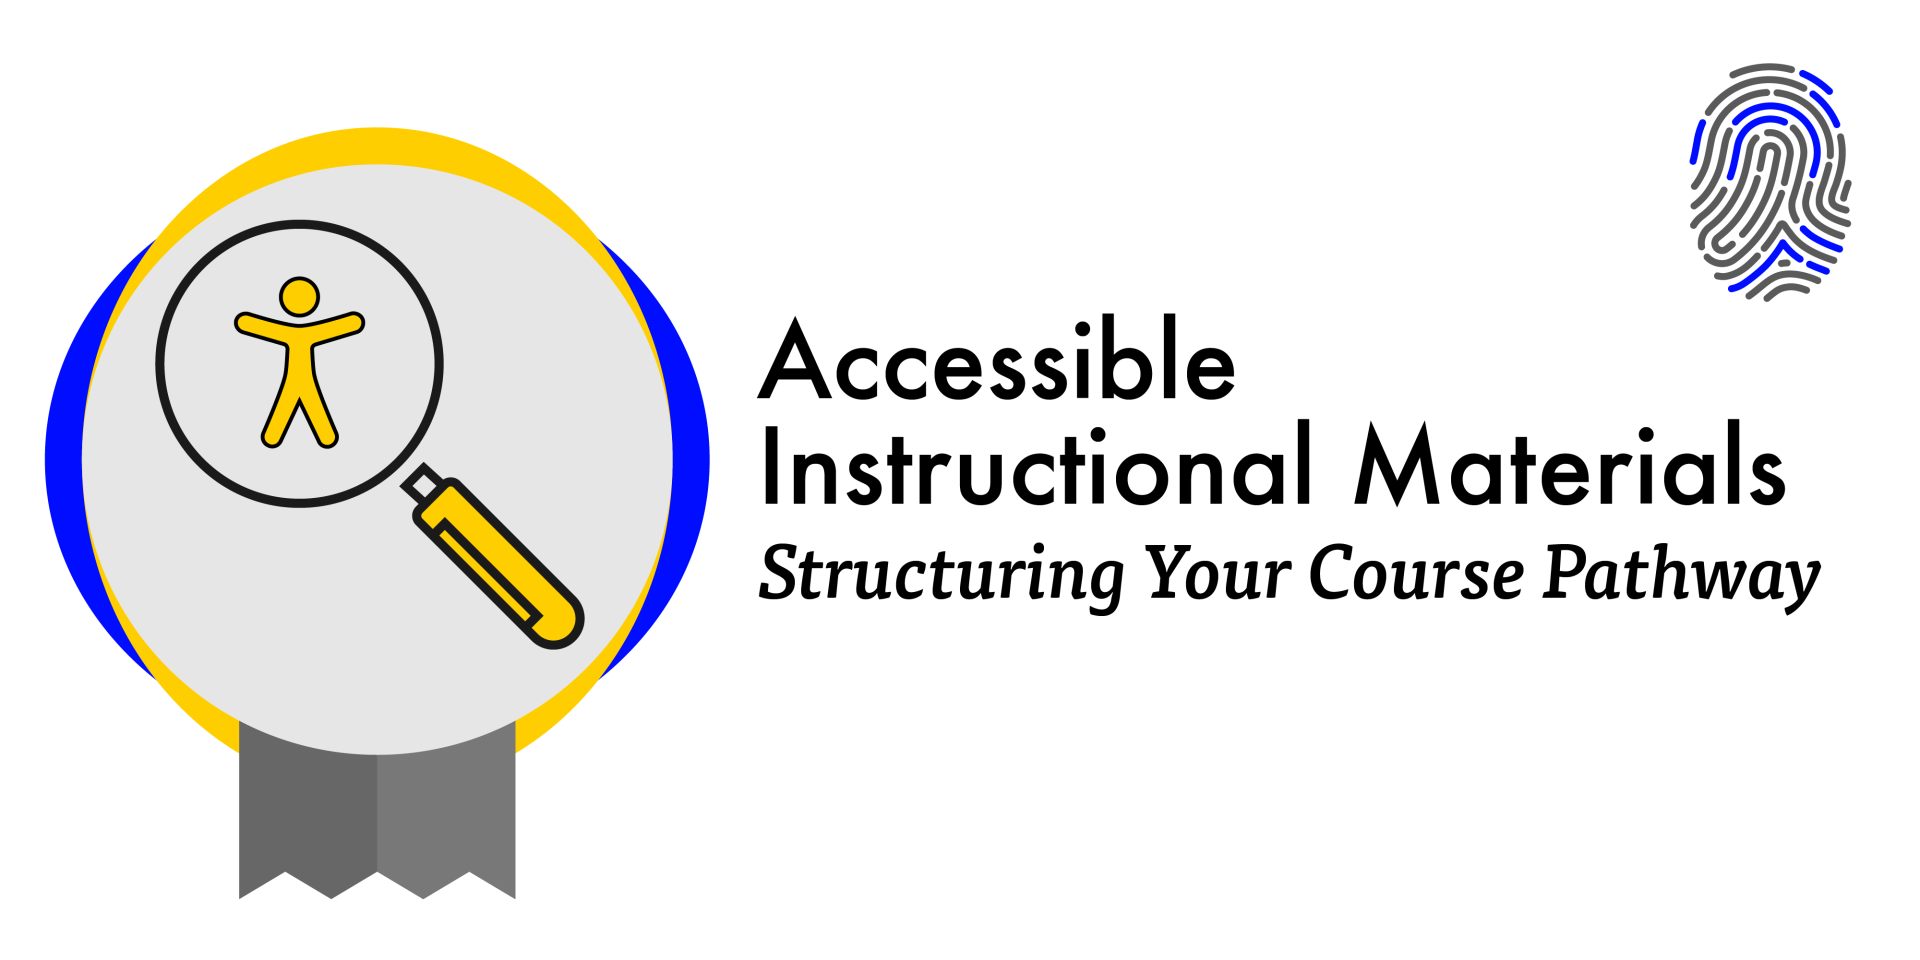 Accessible Instructional Materials, Structuring Your Course Pathway